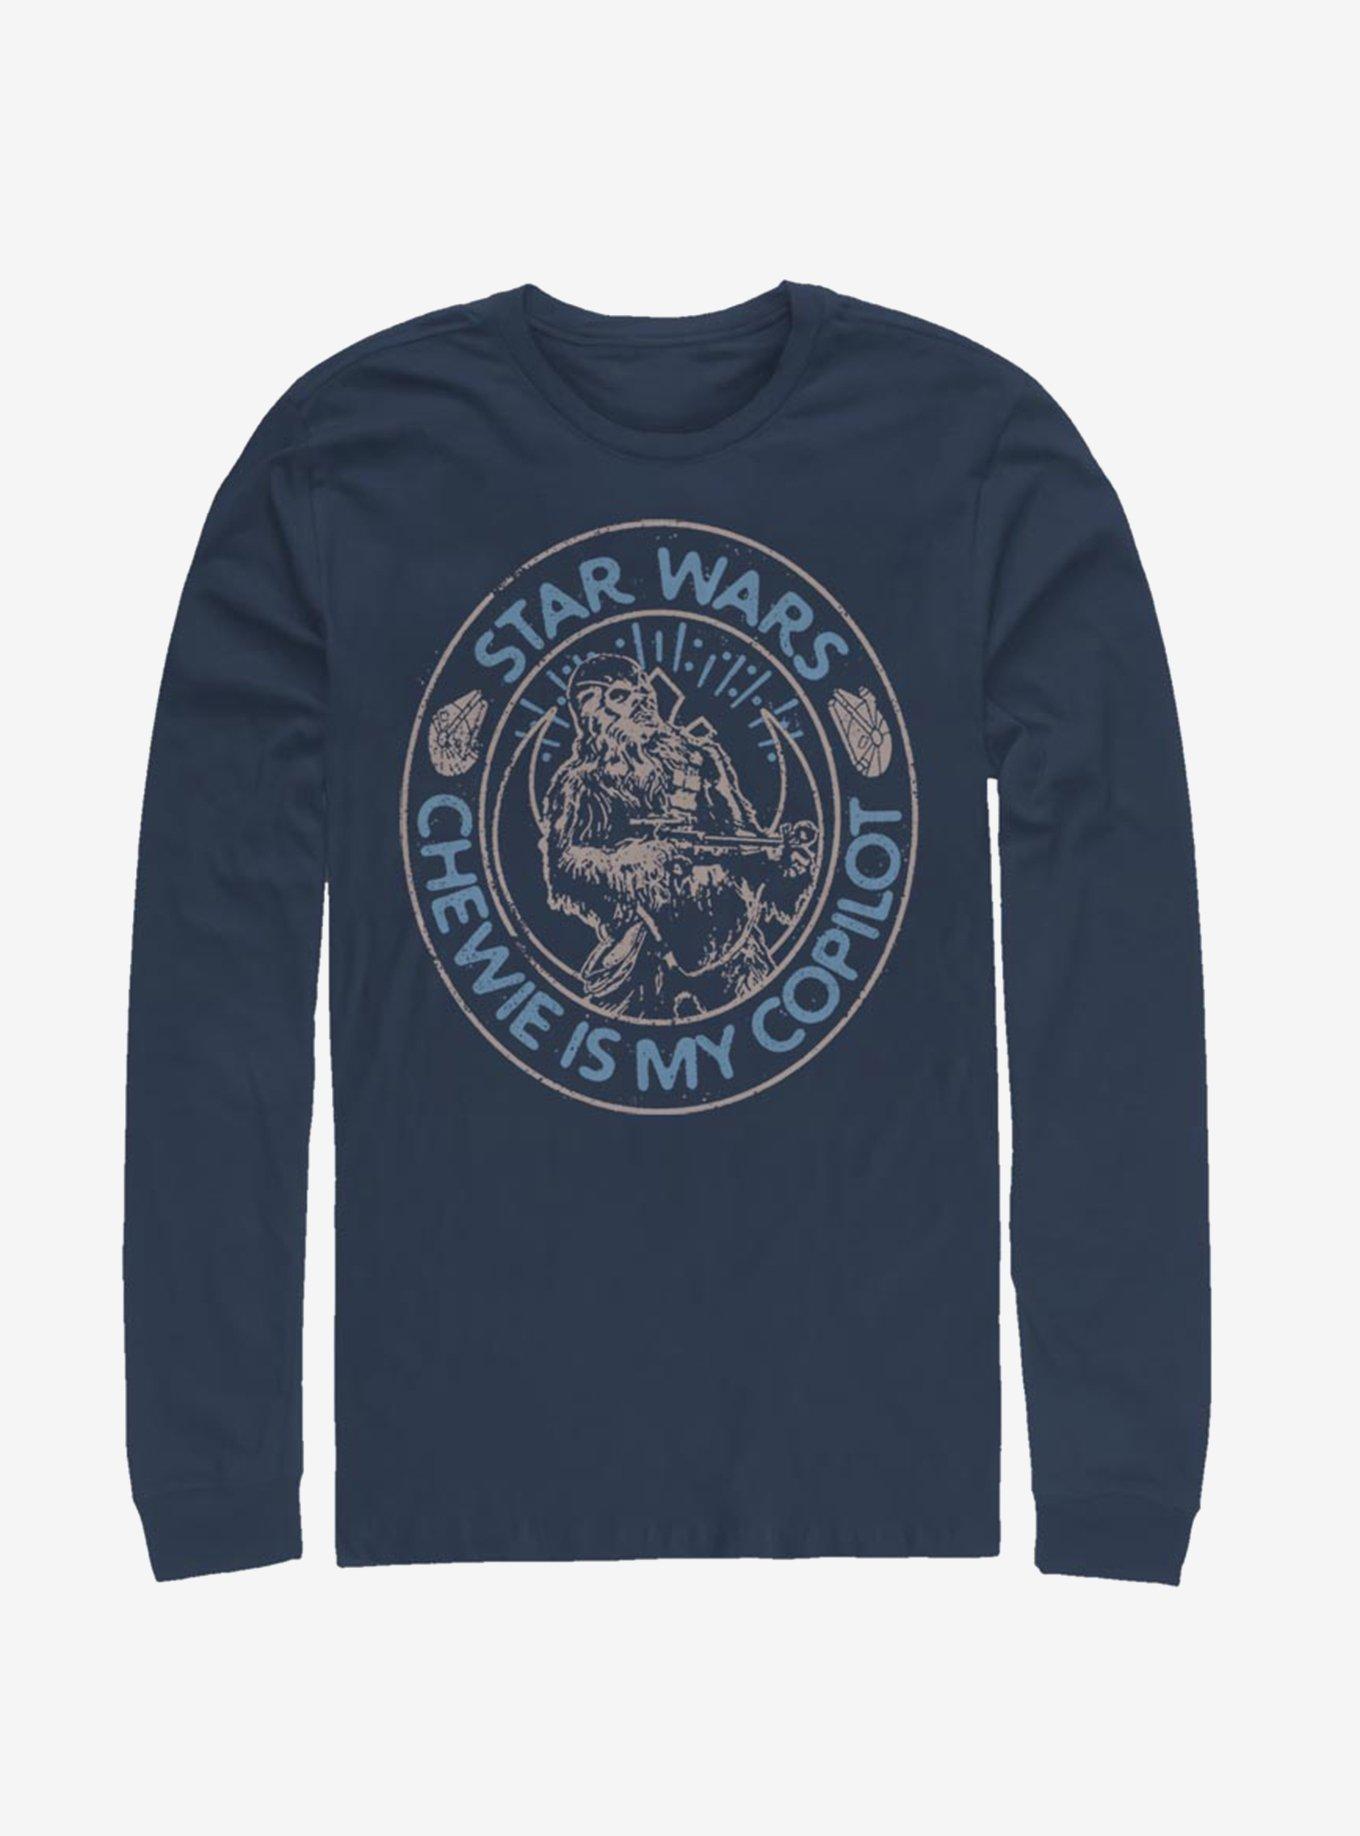 Star Wars Episode IX The Rise Of Skywalker Way Of The Wookiee Long-Sleeve T-Shirt, NAVY, hi-res